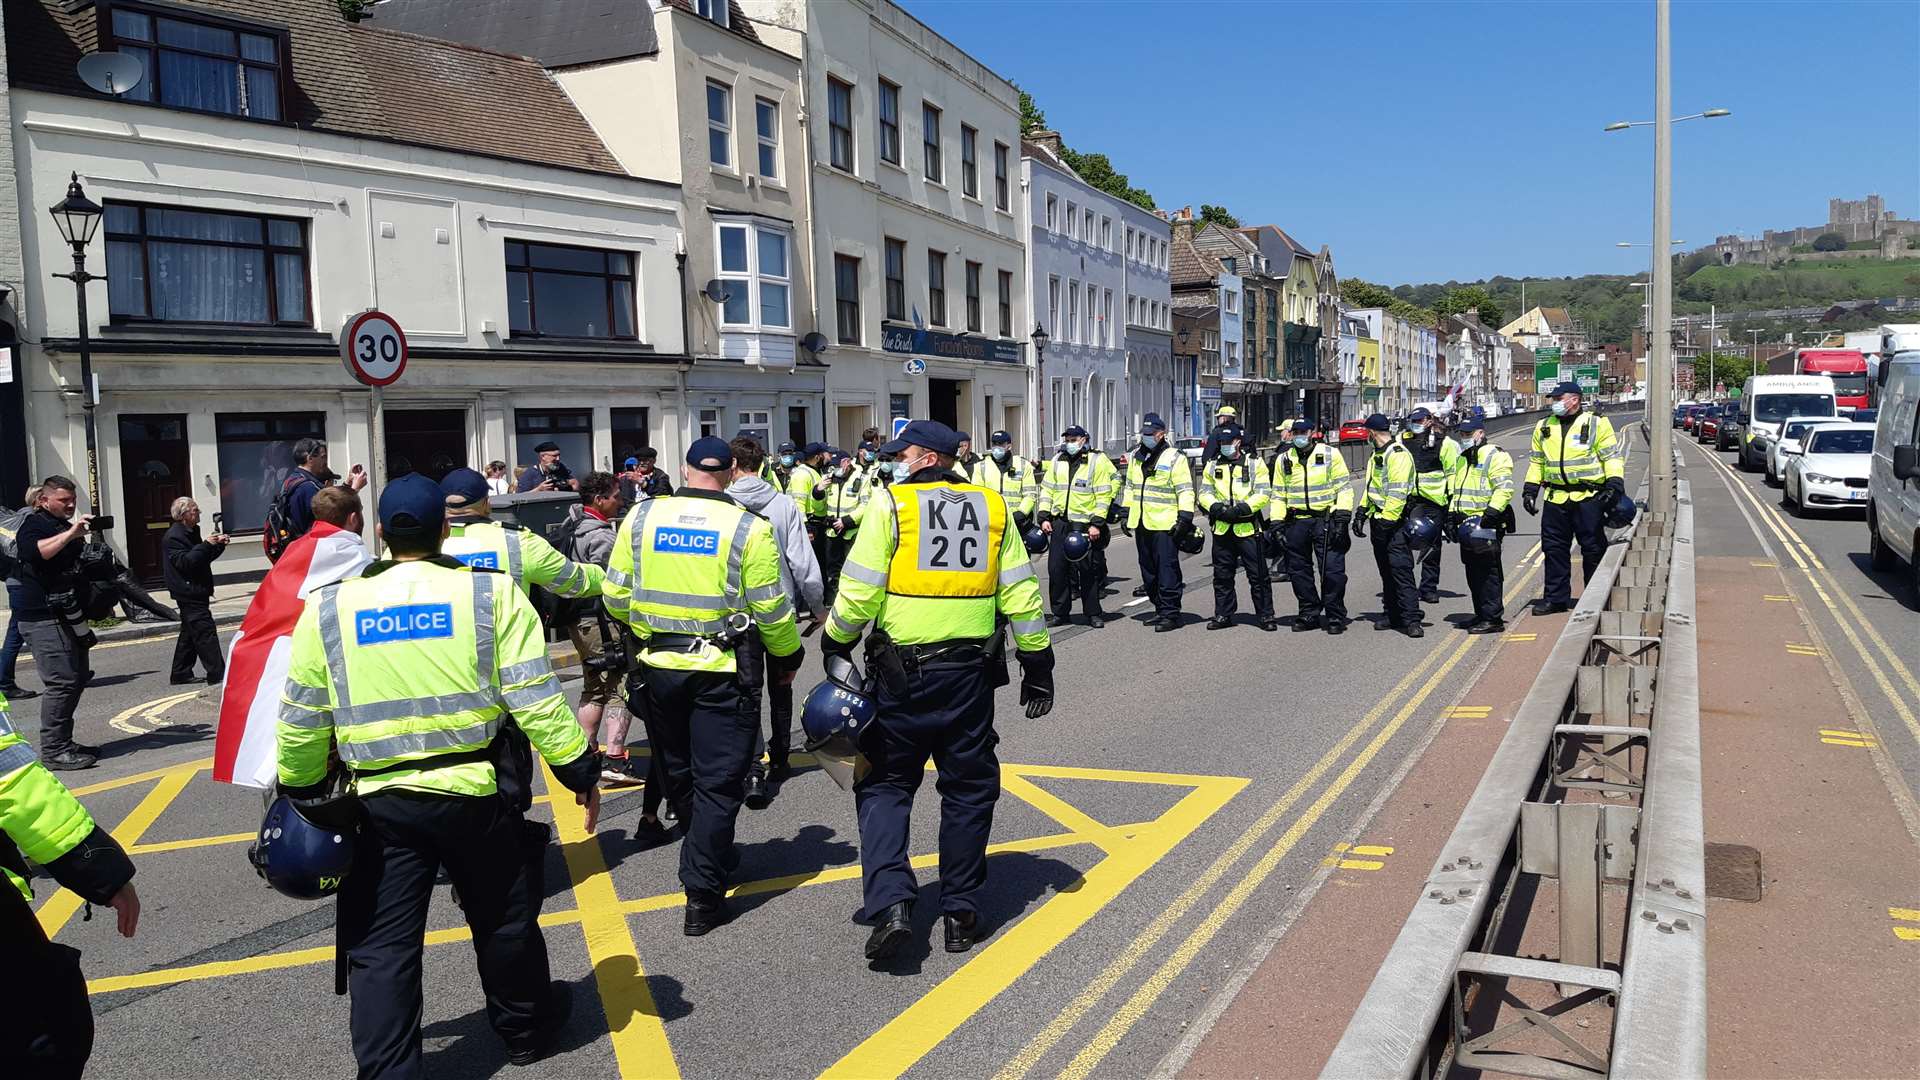 Police were drafted in from forces across the south east